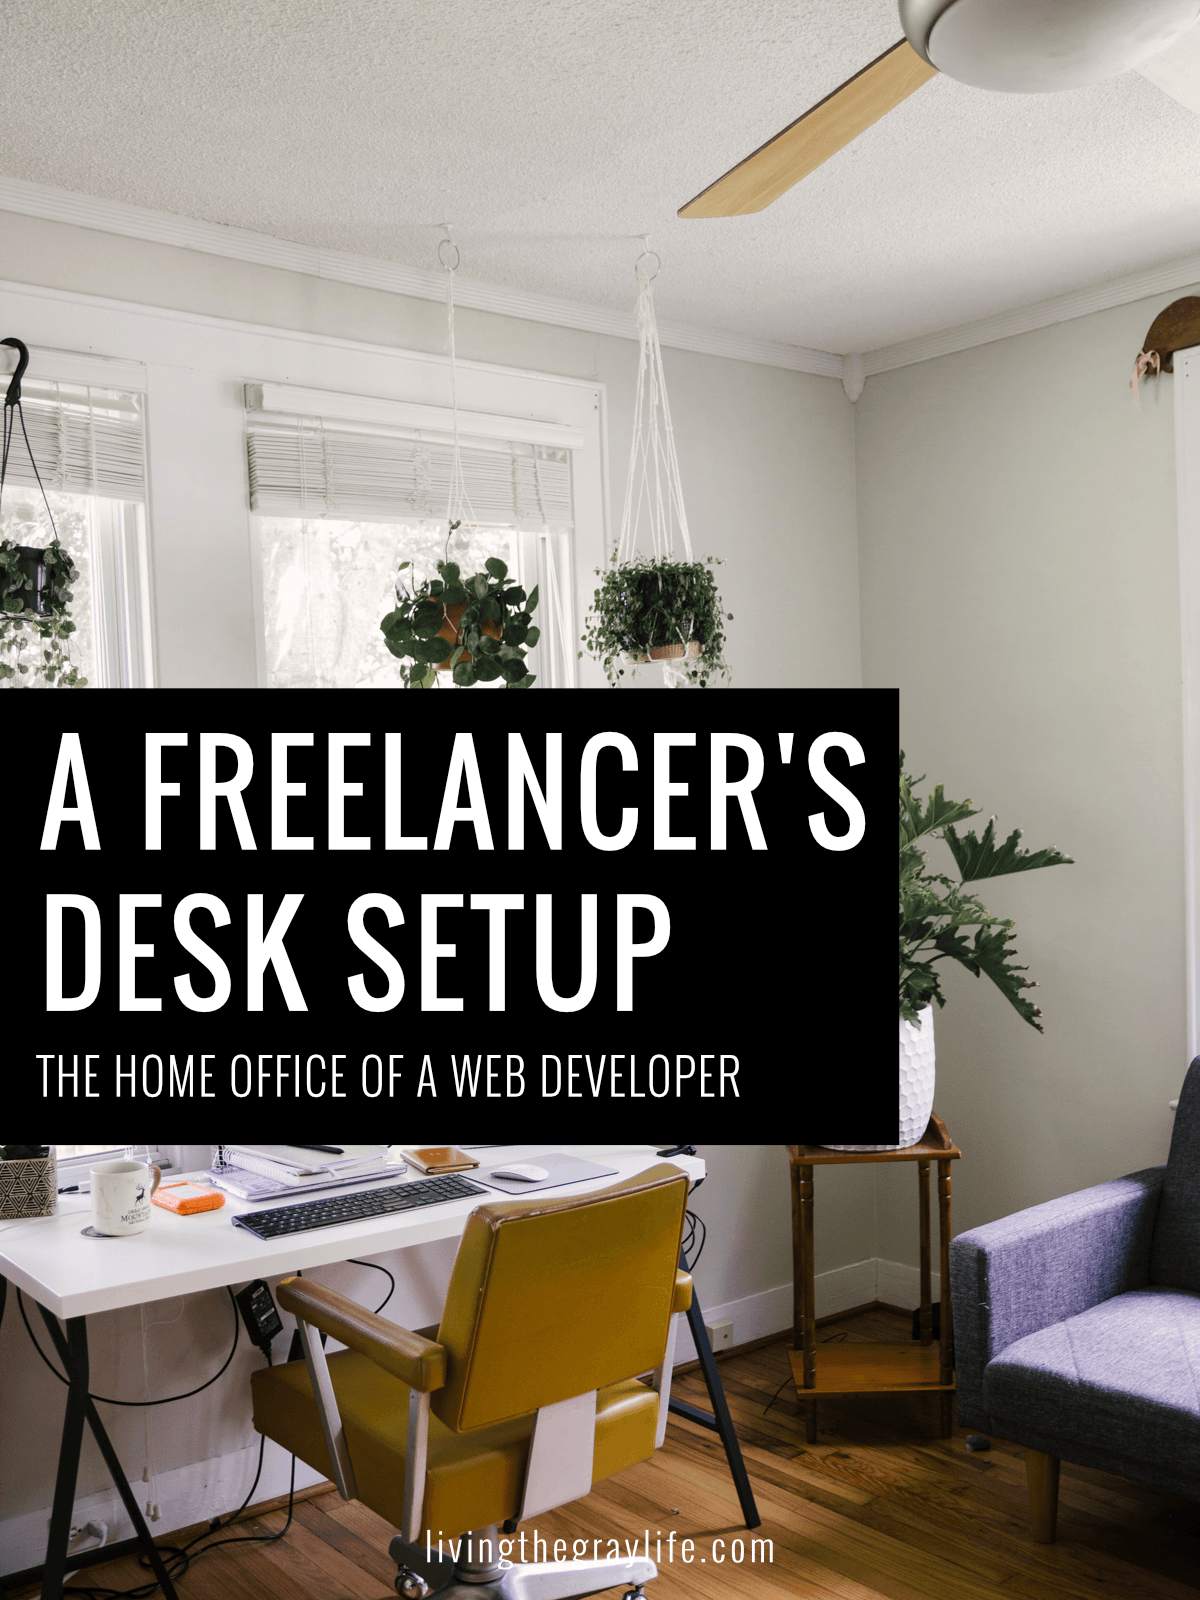 Here's how a freelance web developer sets up her desk space for productivity.